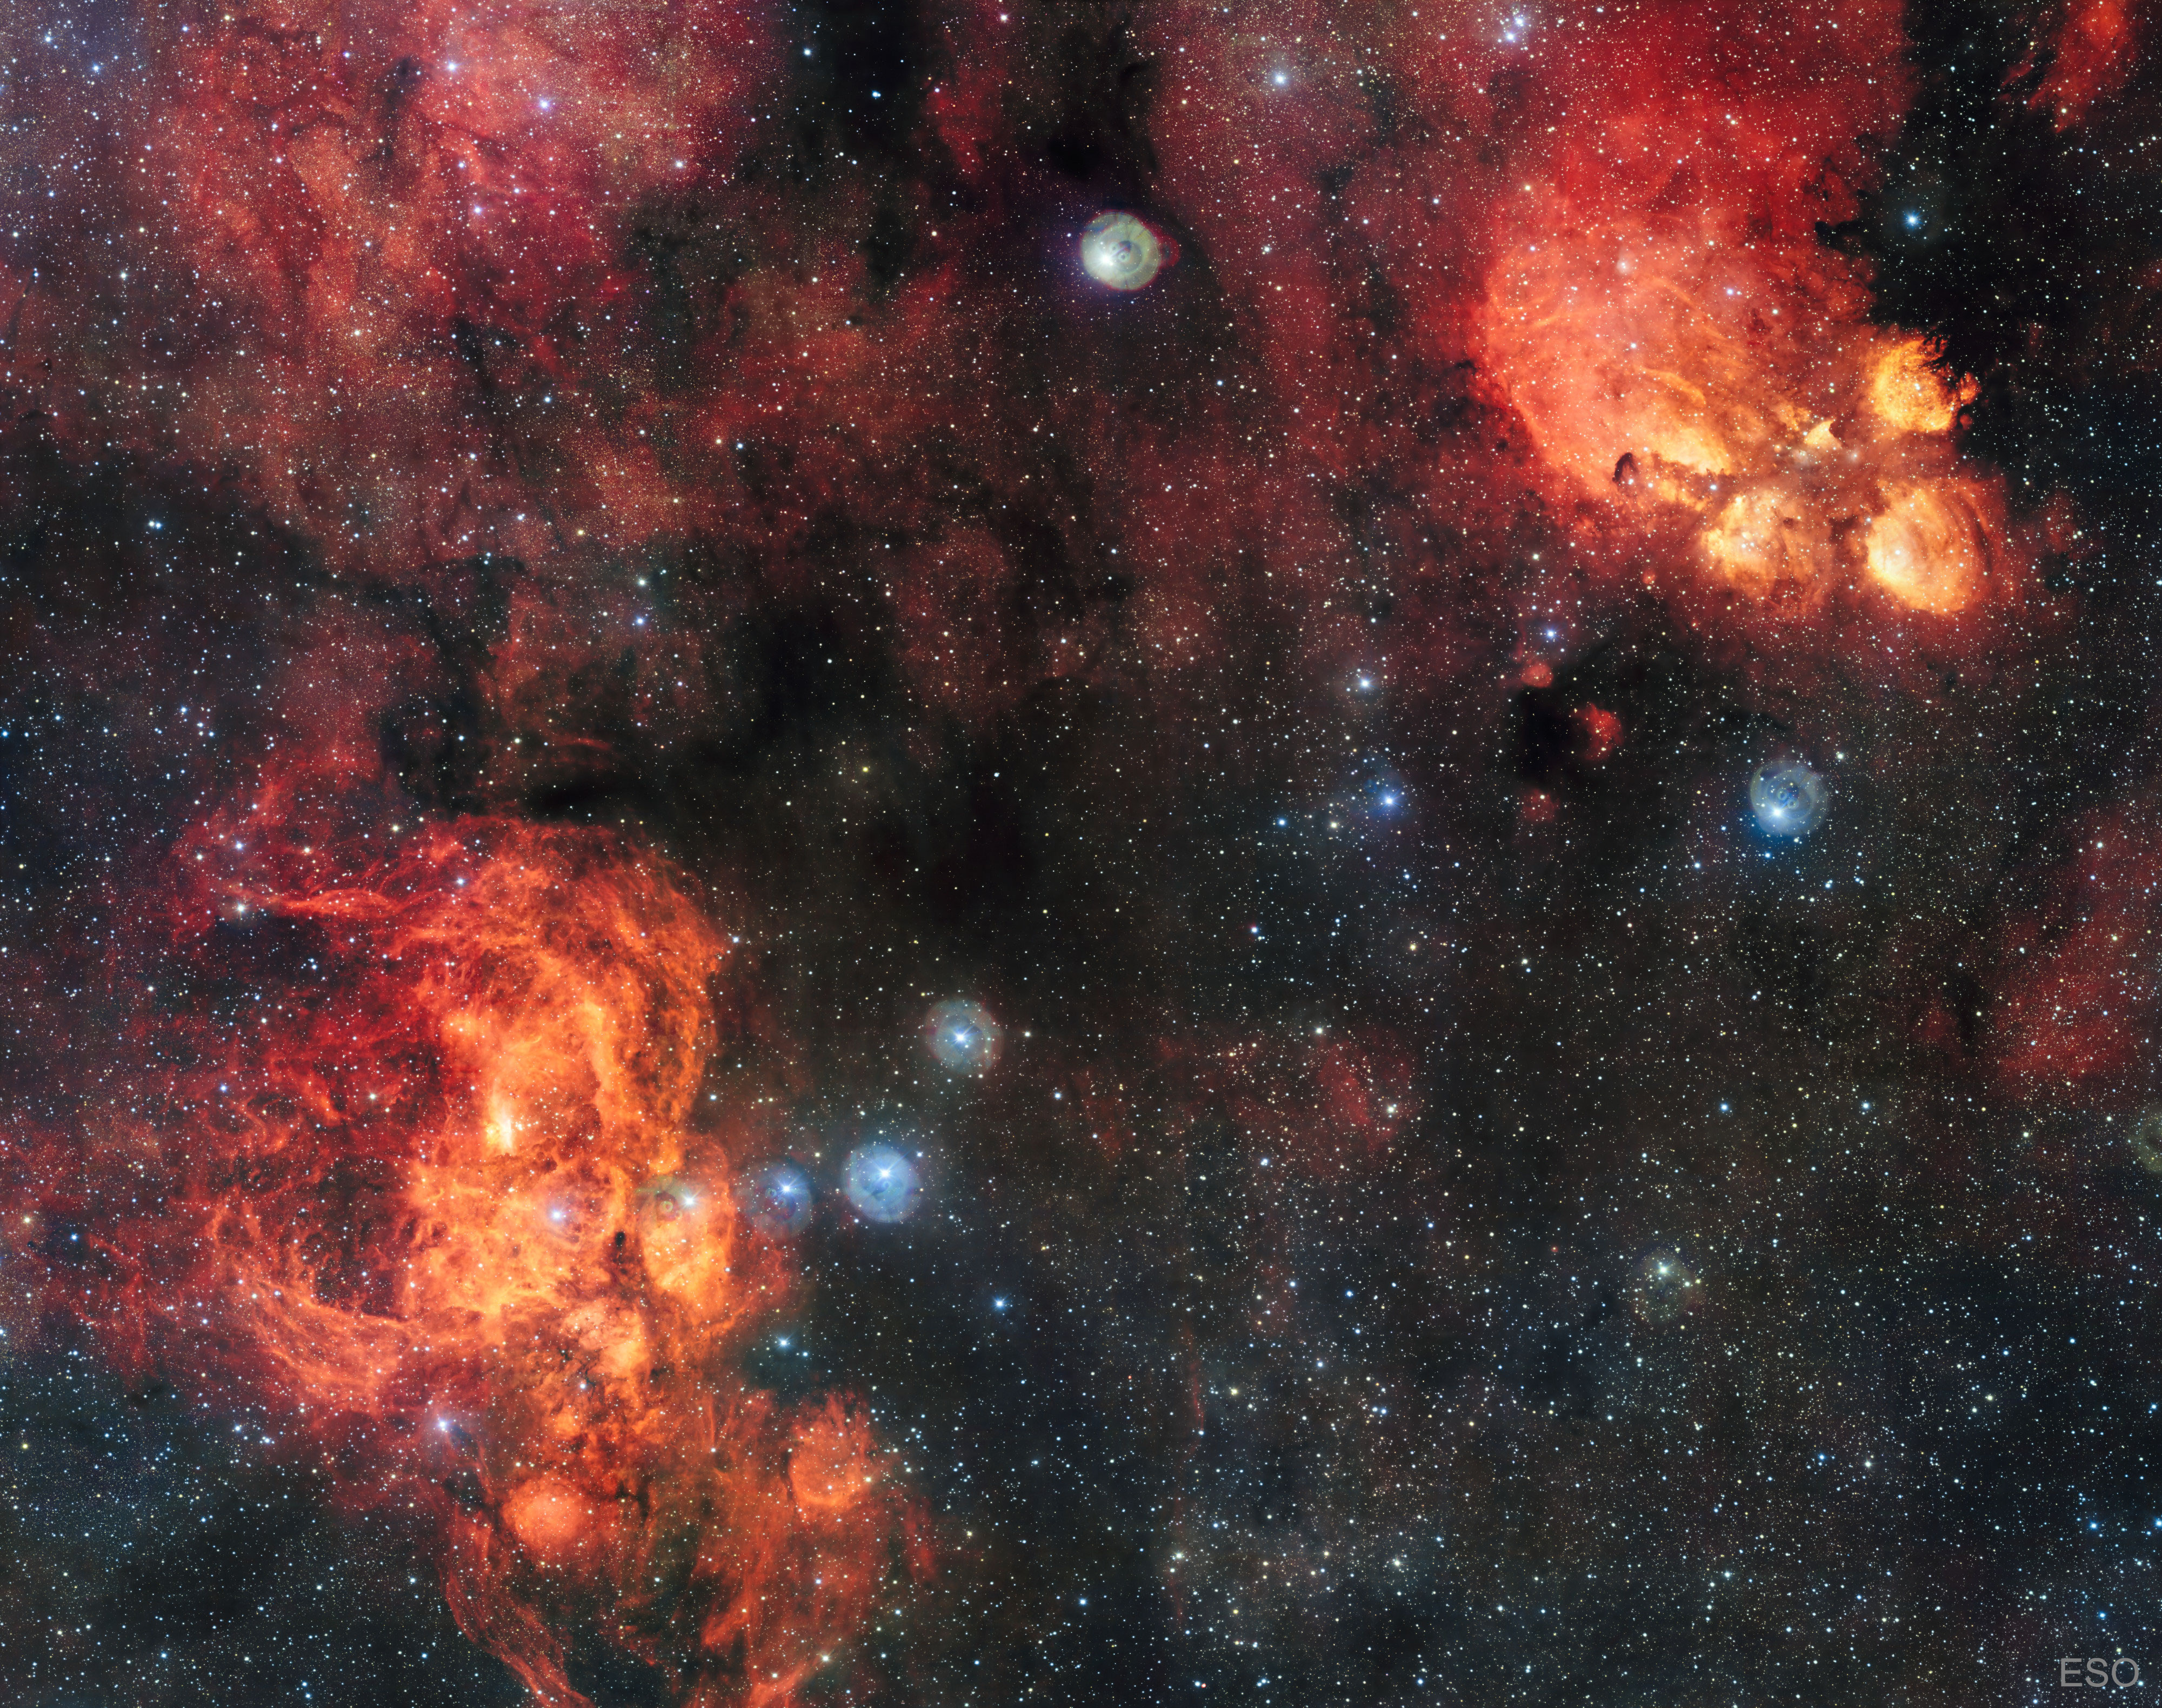 Astronomy Picture of the Day - Σελίδα 3 LobsterCat_VLT_4000